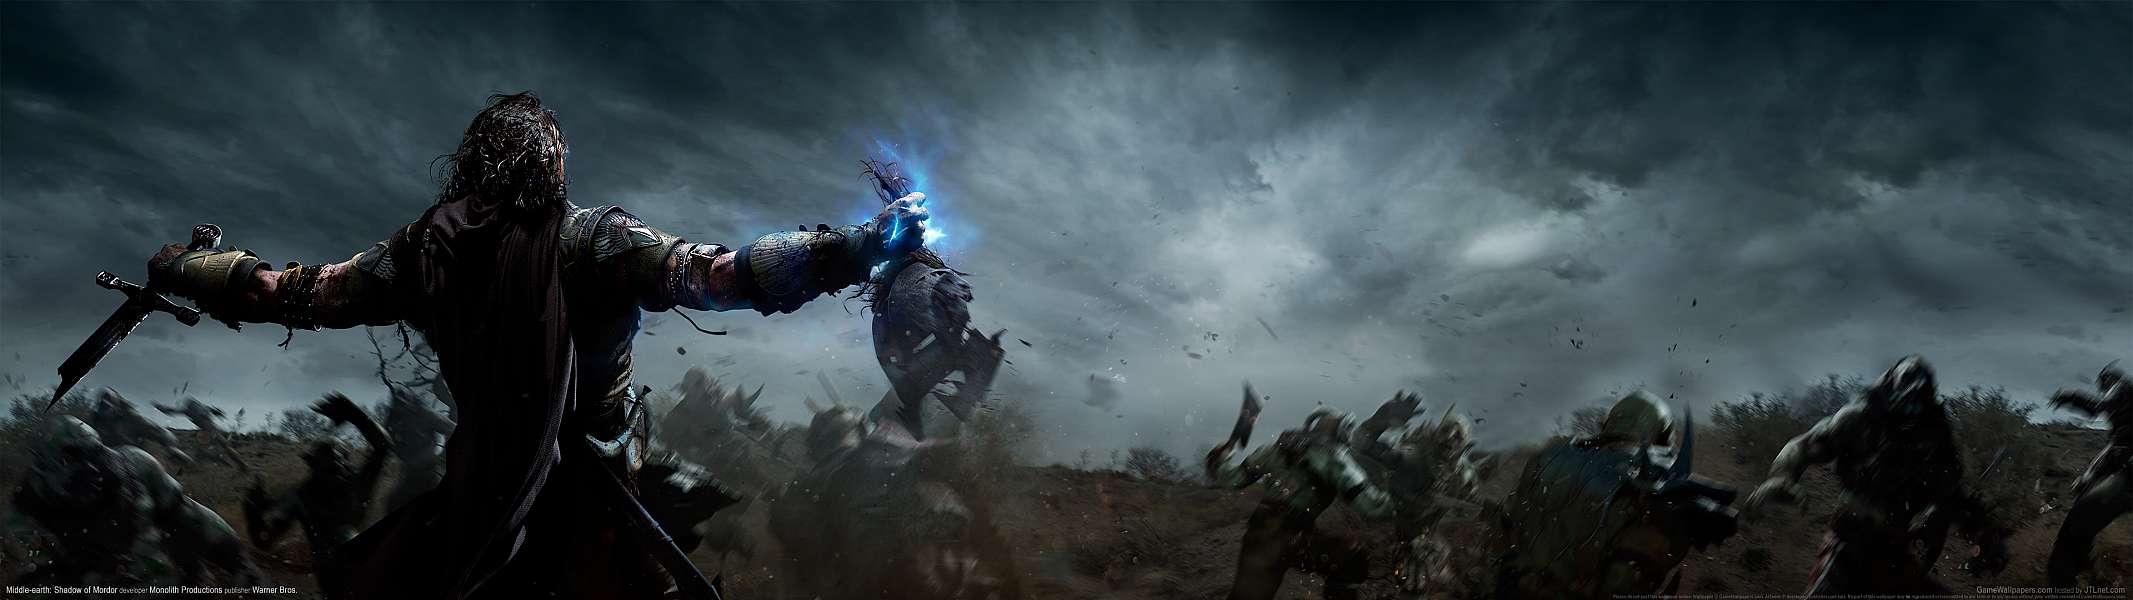 Middle-earth: Shadow of Mordor dual screen wallpaper or background